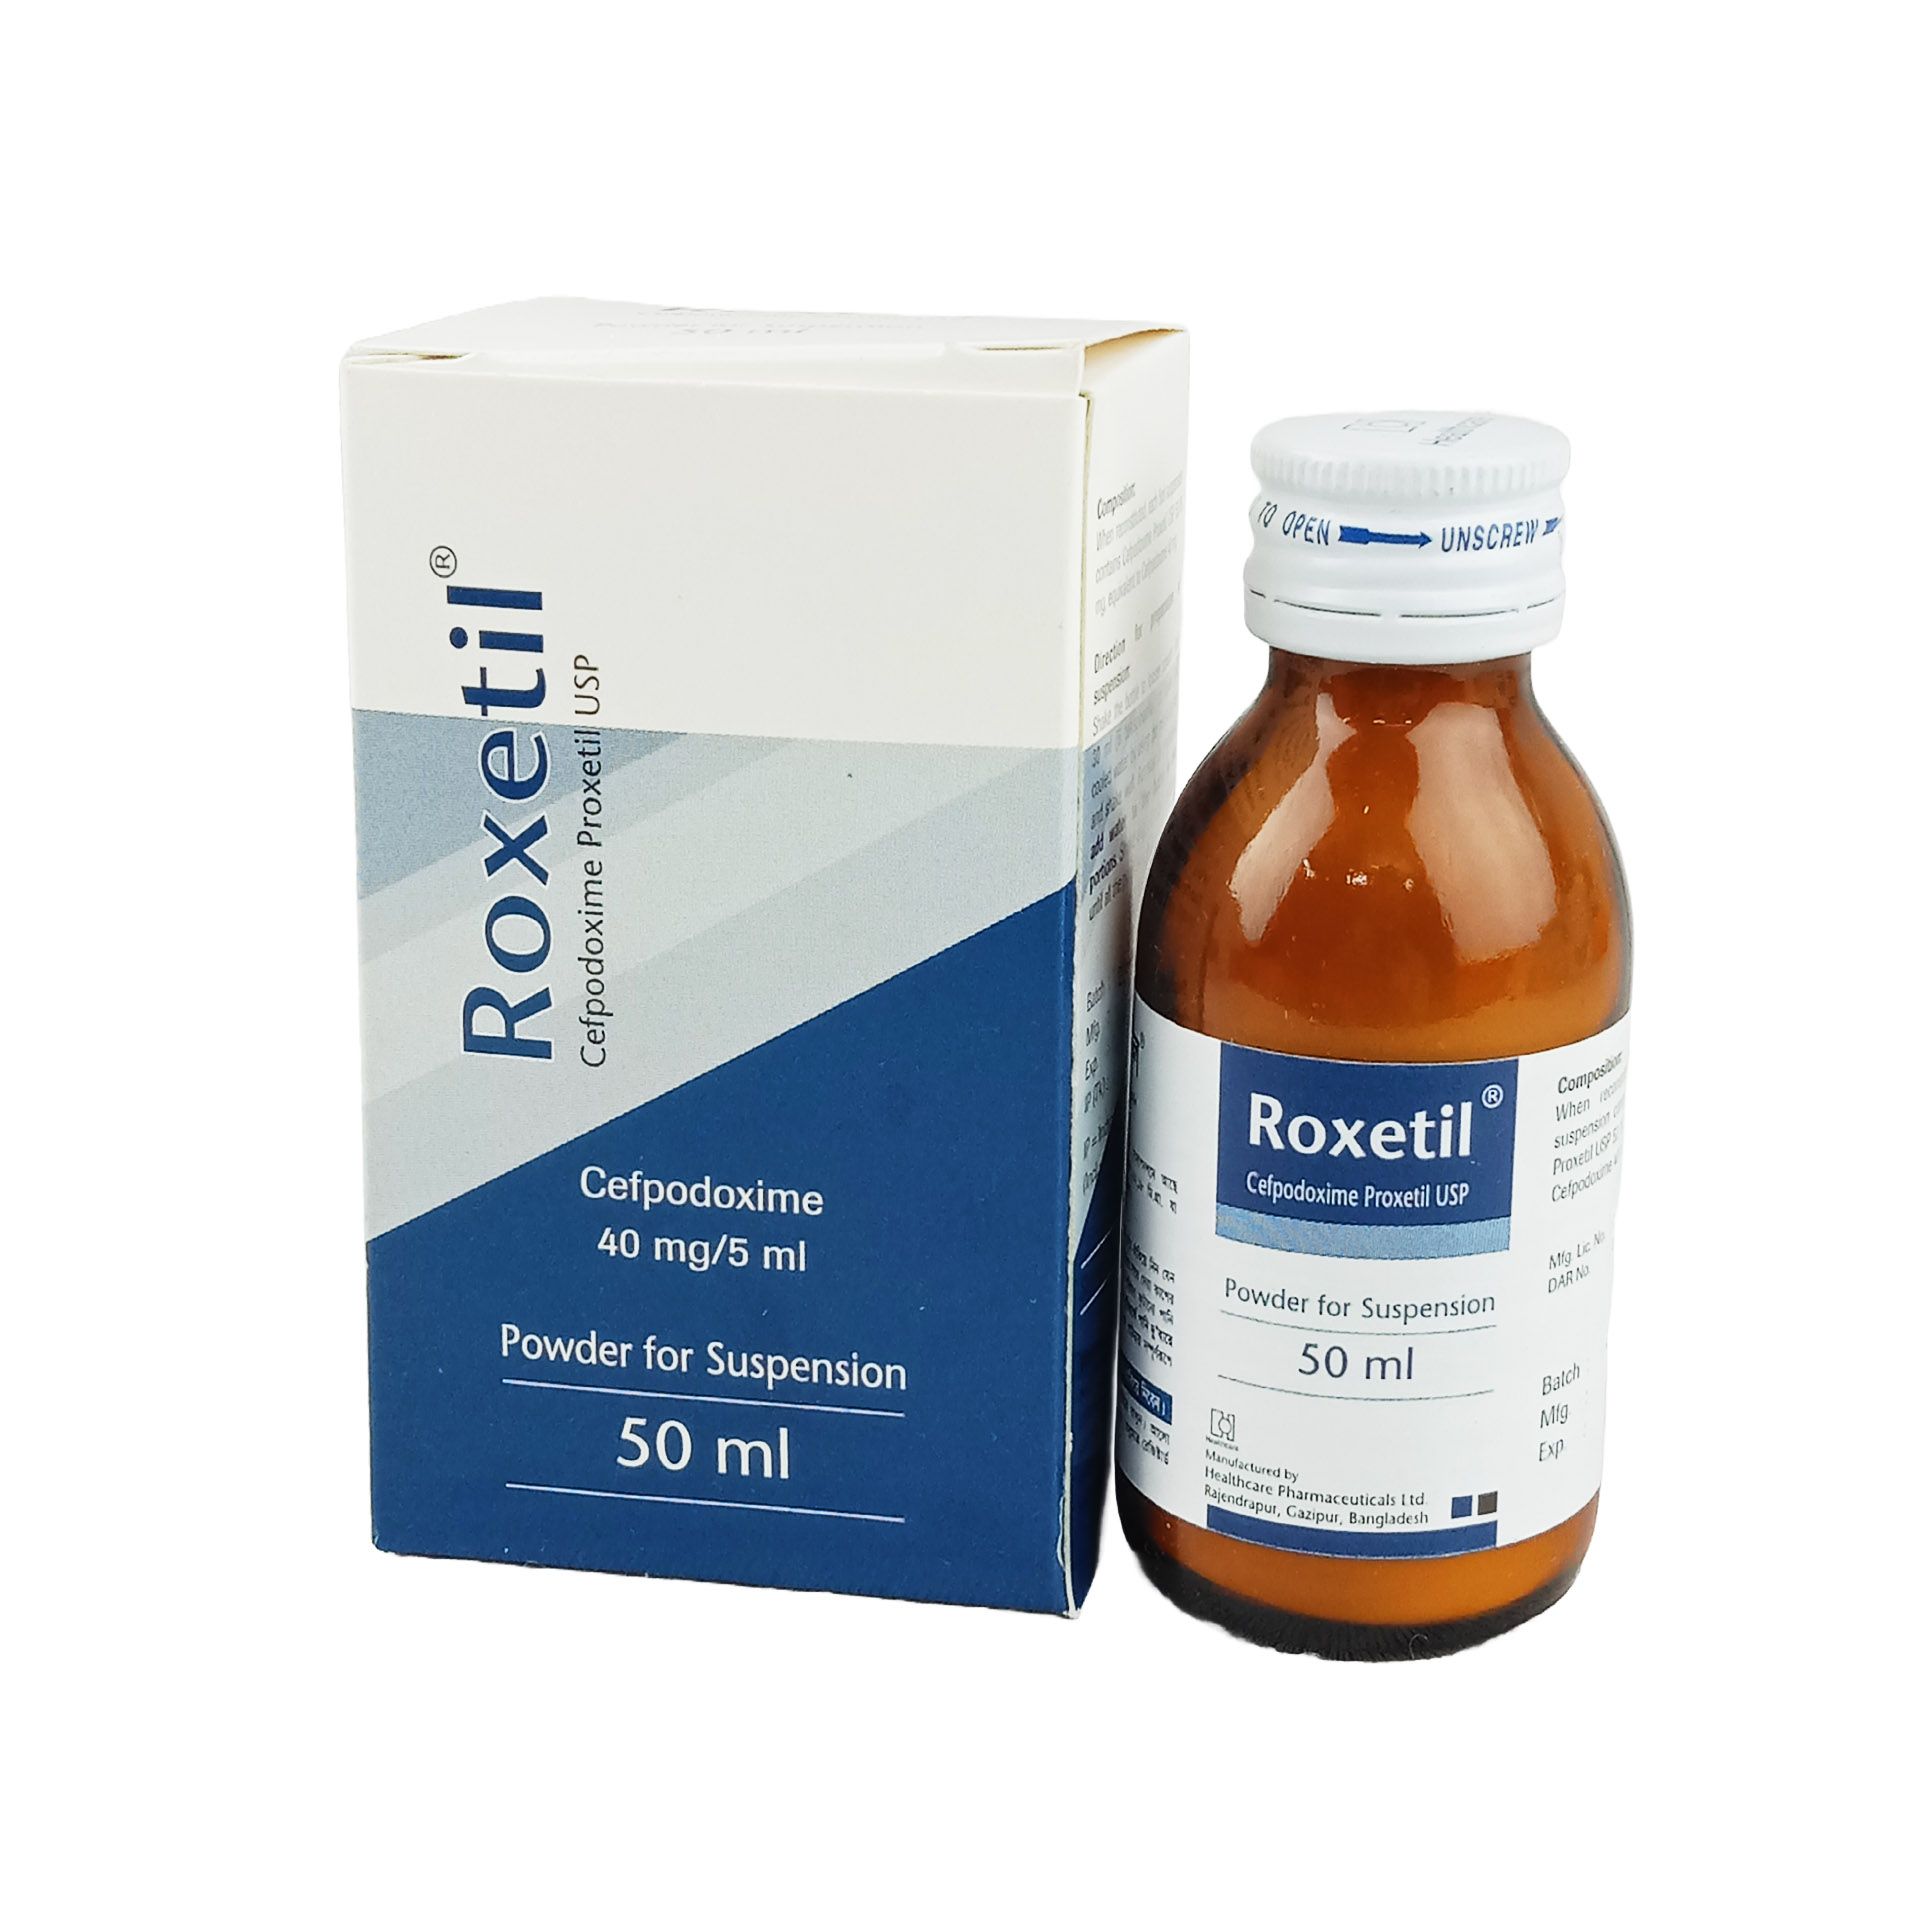 Roxetil 40mg/5ml Powder for Suspension